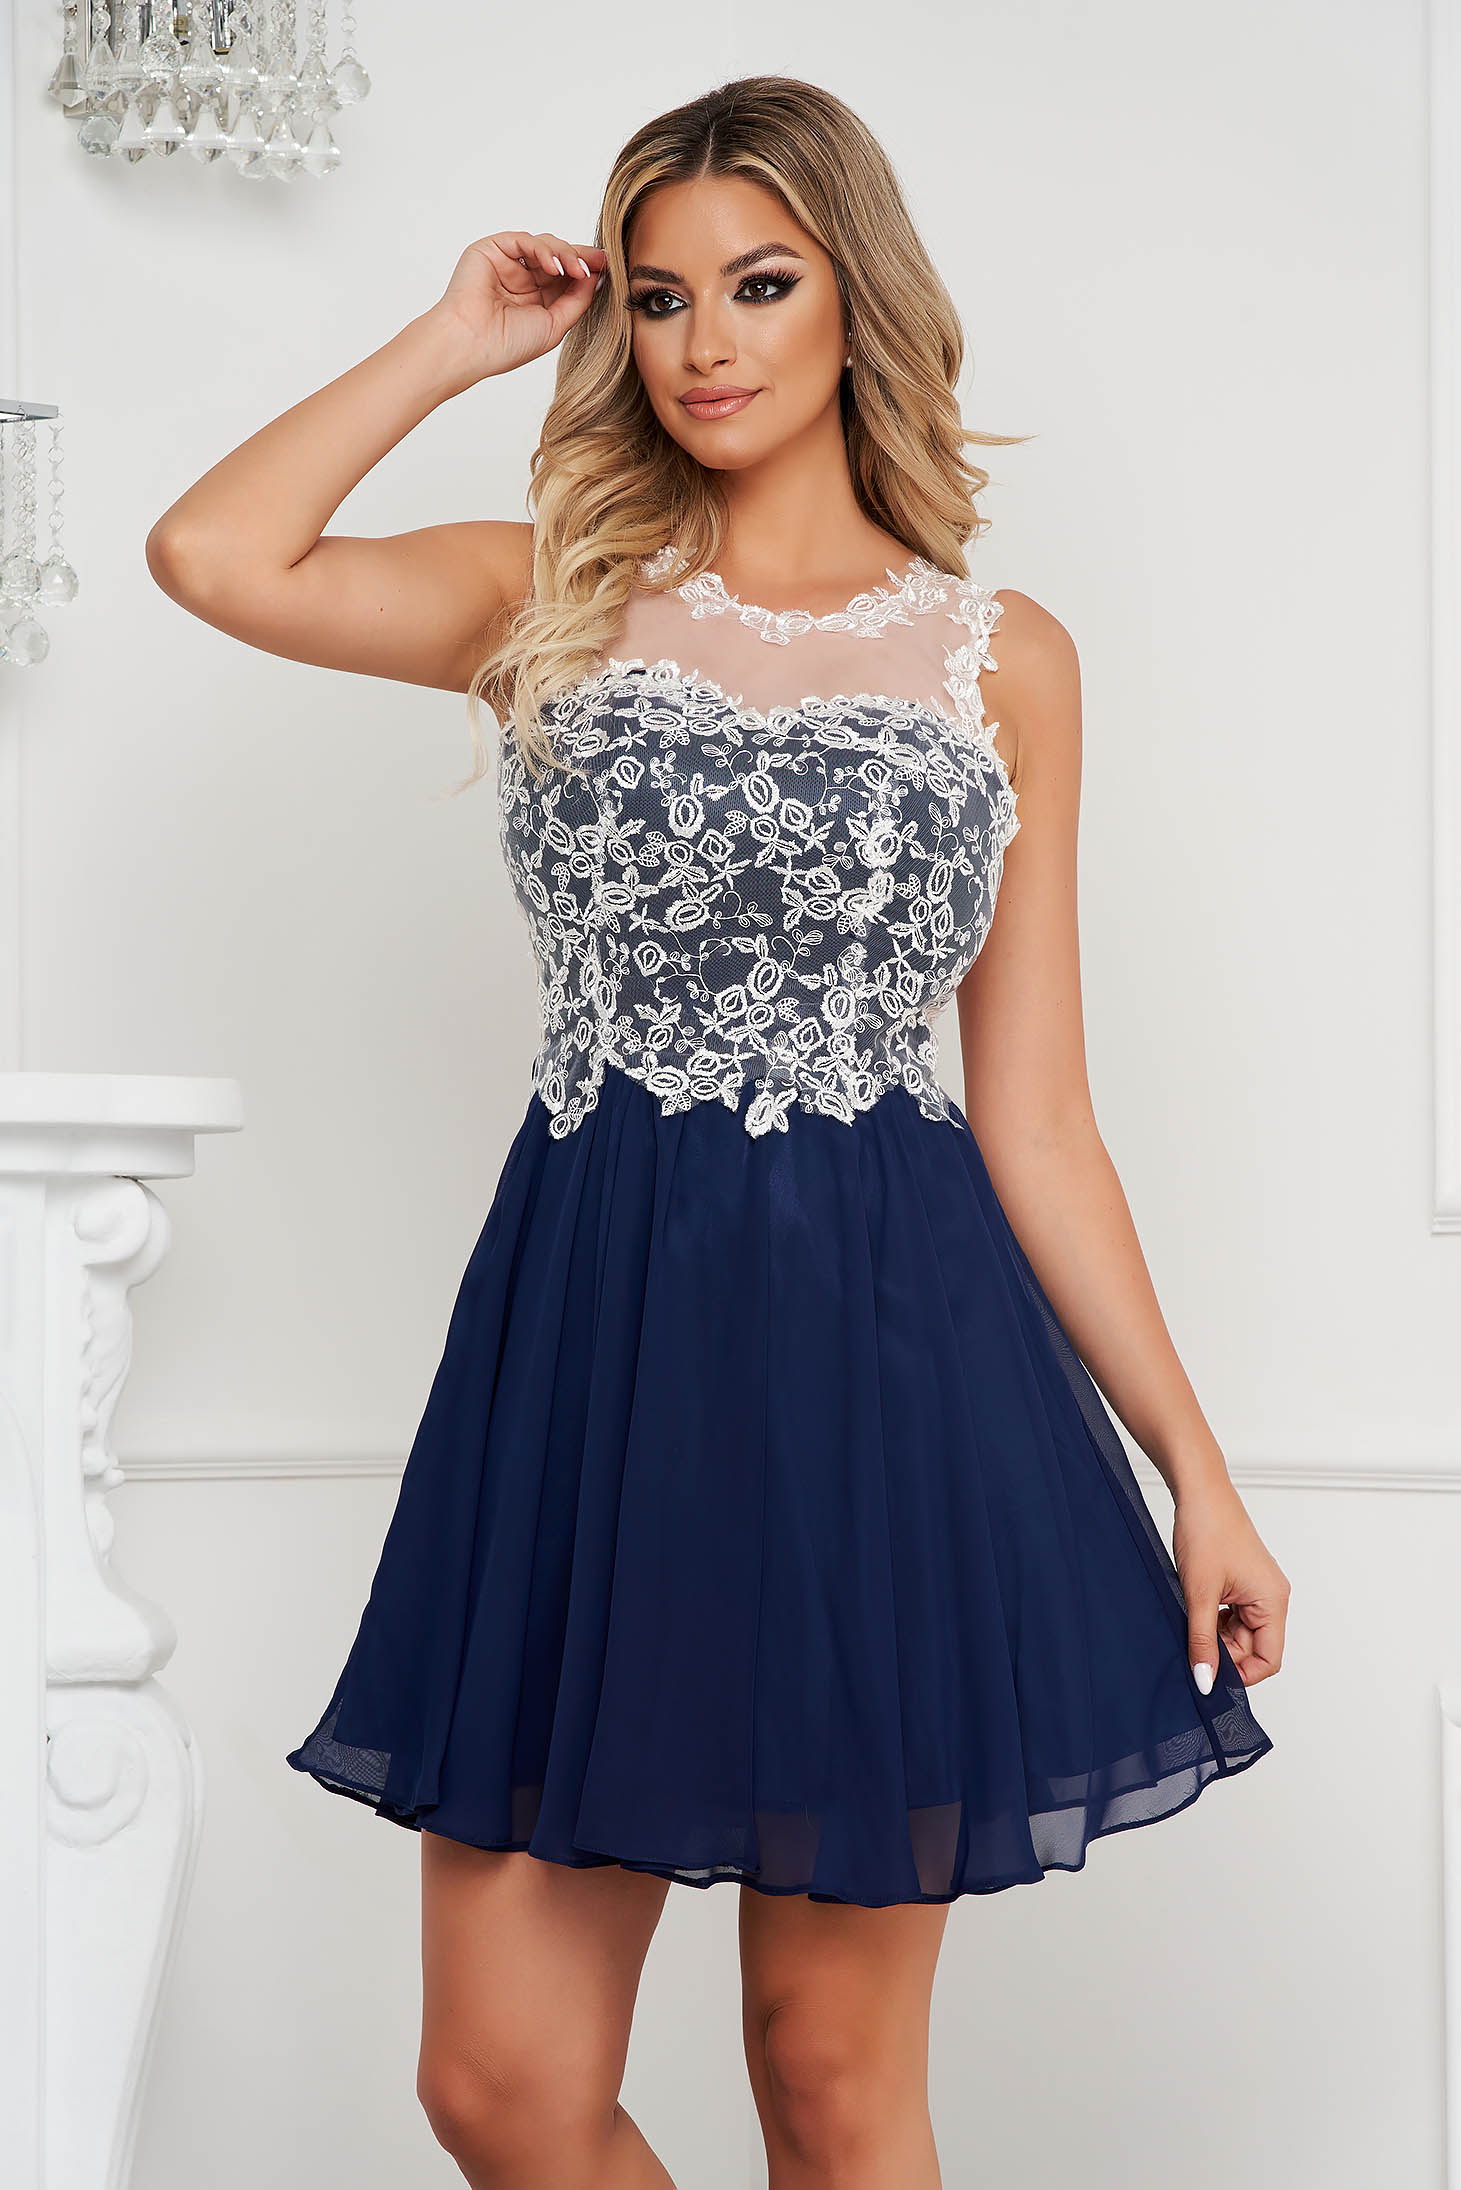 Darkblue dress short cut occasional from veil fabric with embroidery details sleeveless